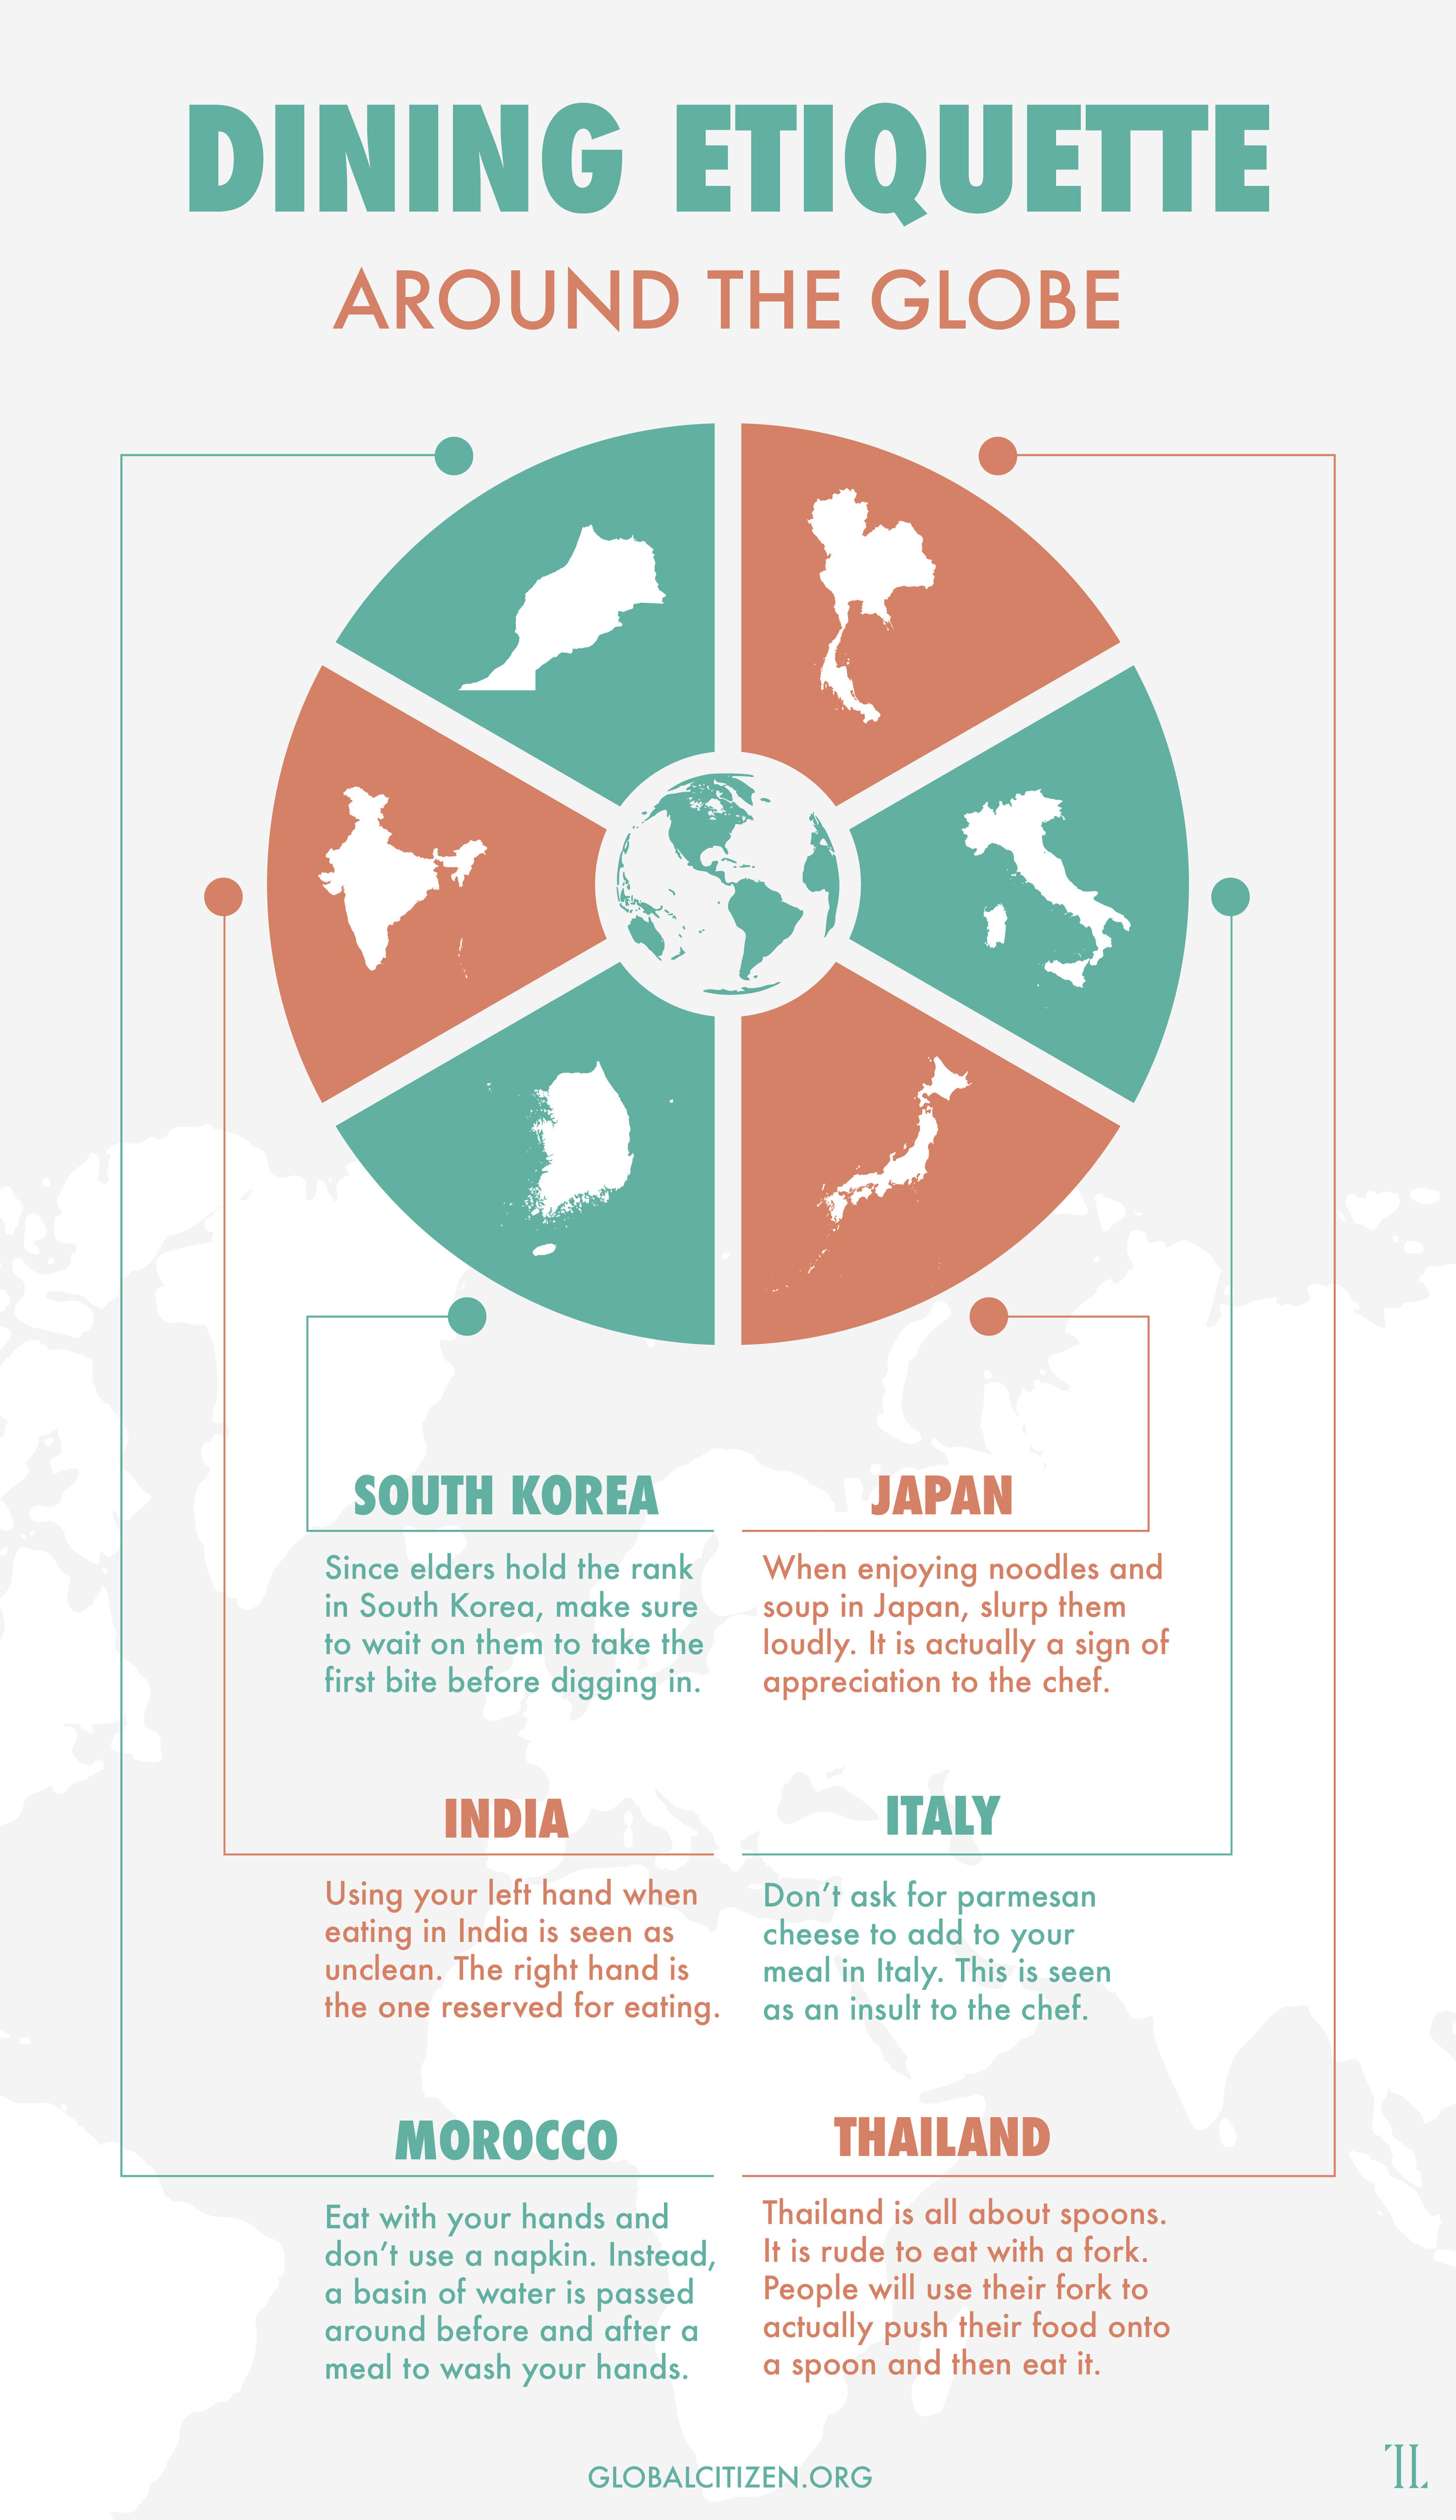 Taking a trip around the world can show you that food norms vary from country to country. Here are some interesting dining etiquette tips from around the globe.Maps by Free Vector Maps: https://freevectormaps.com